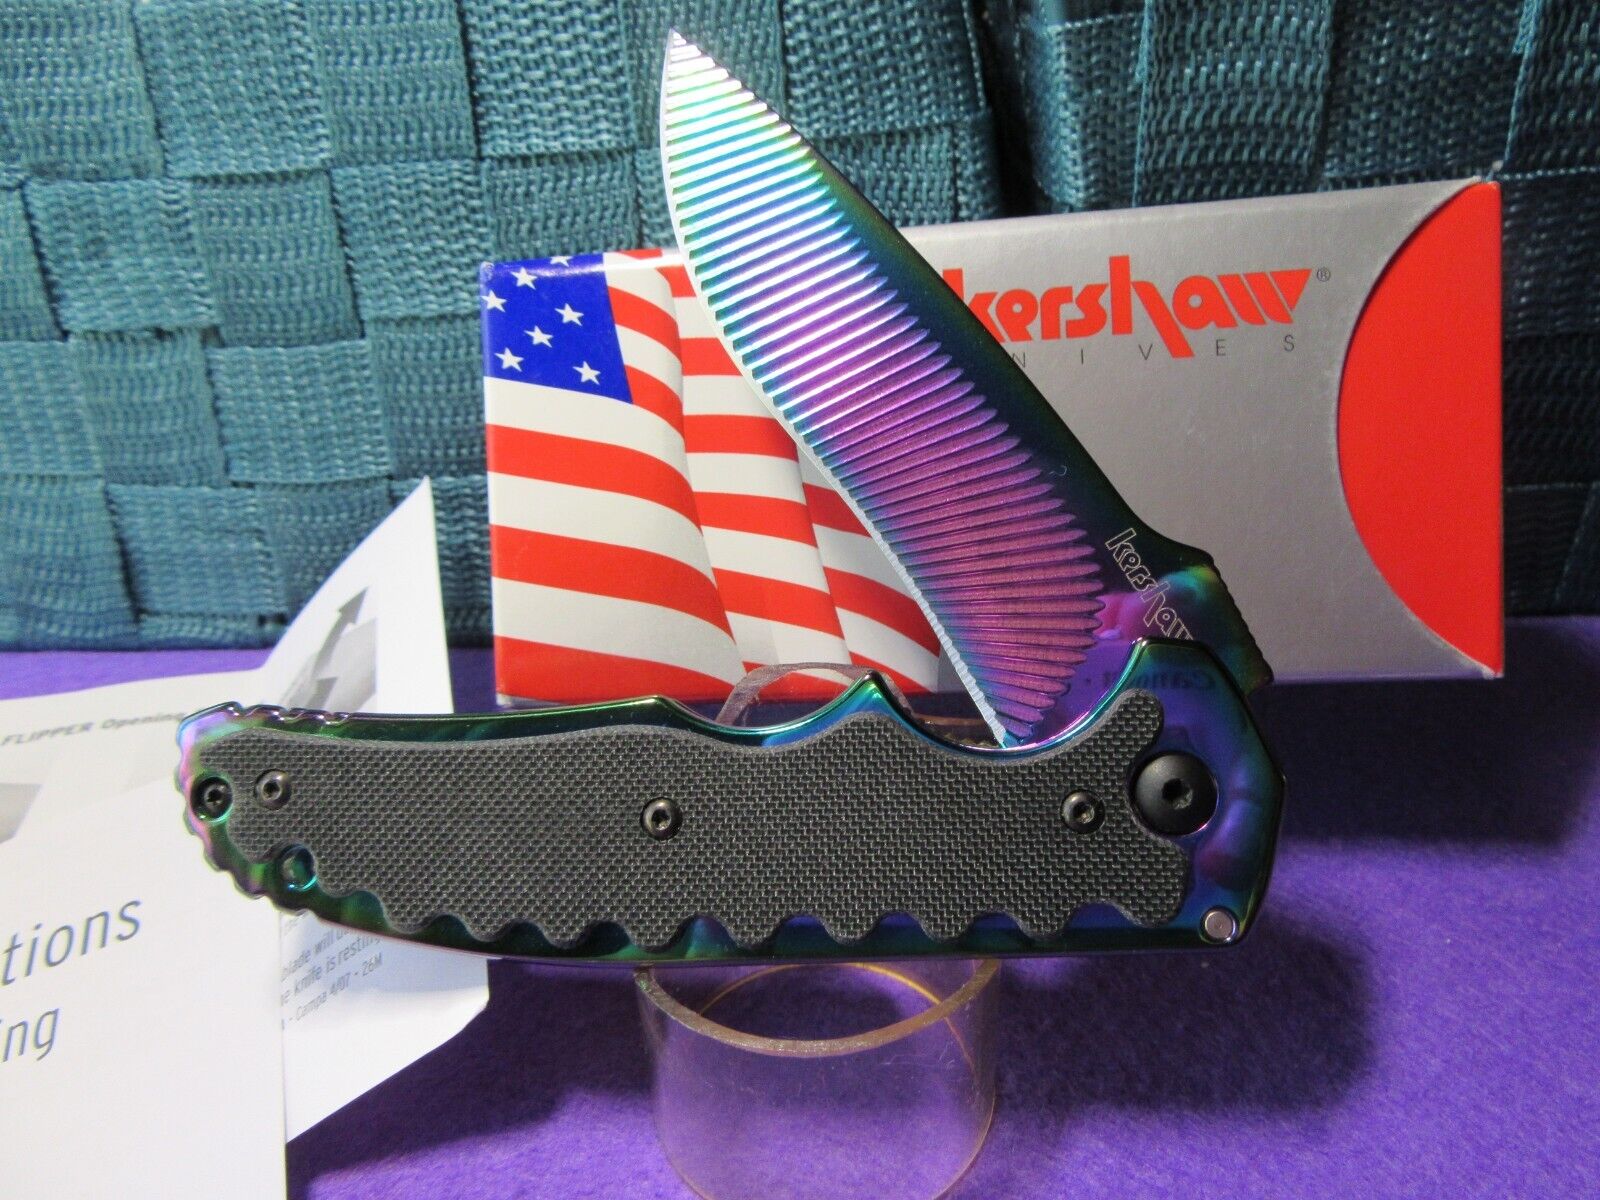 Kershaw Groove Ultra Rare Rainbow Edition. Mint with all original packaging.